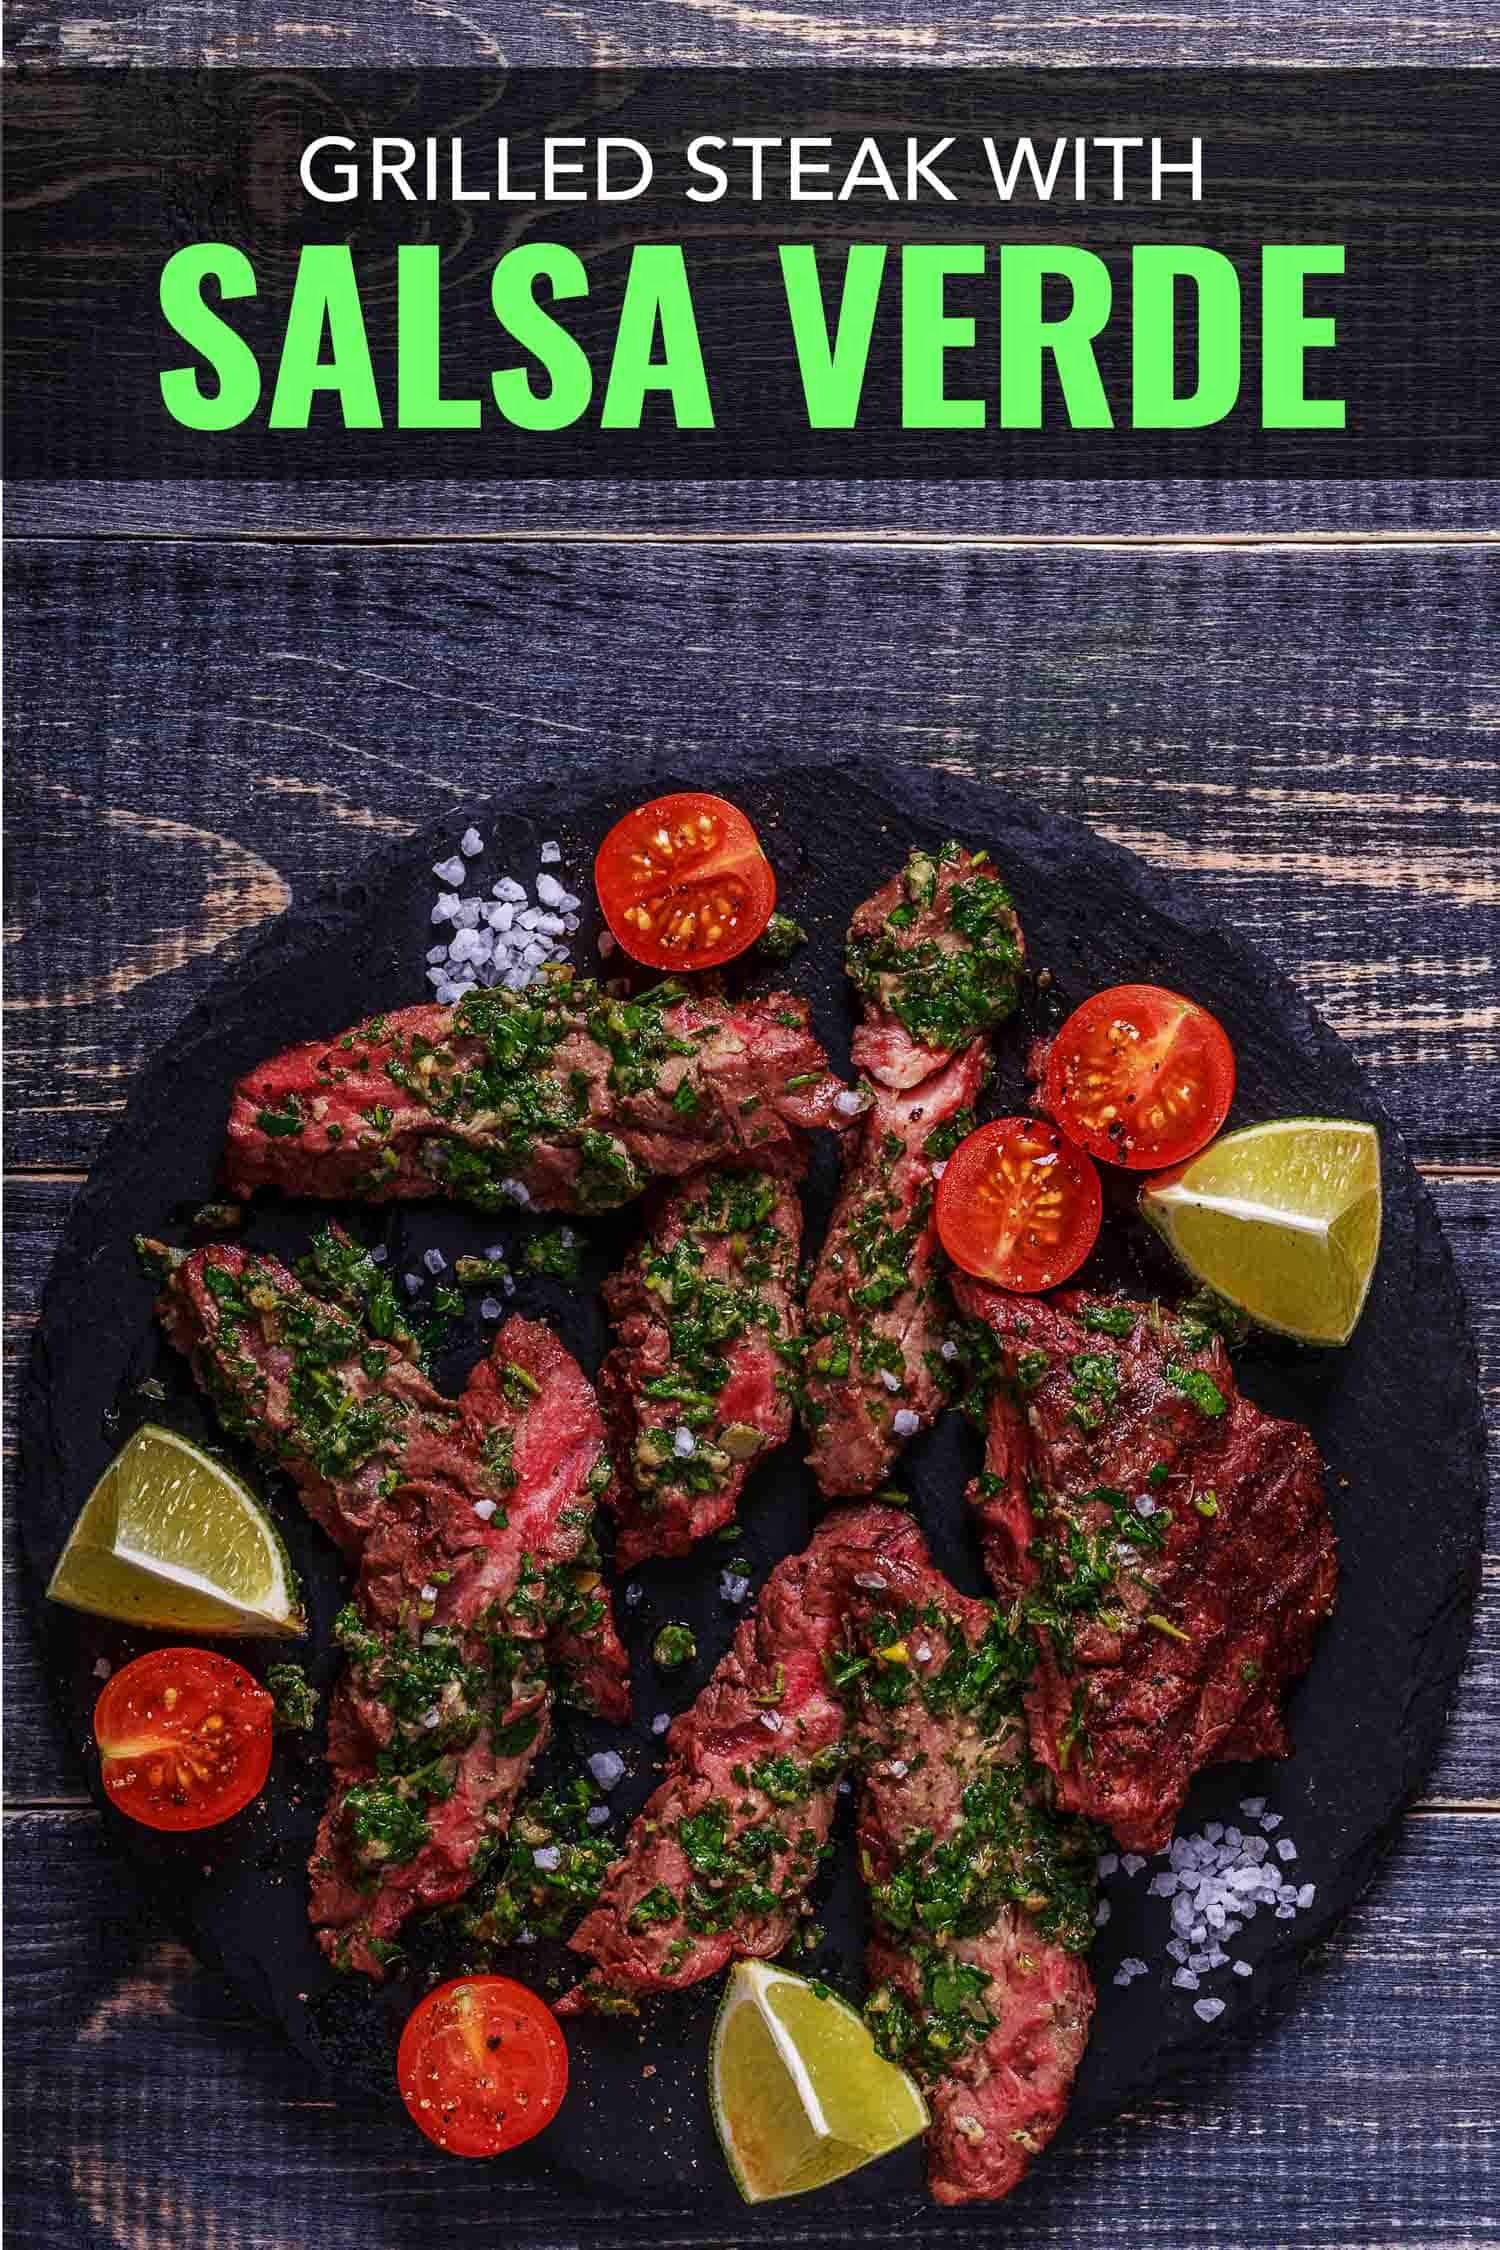 Grilled steak with salsa verde on a black plate